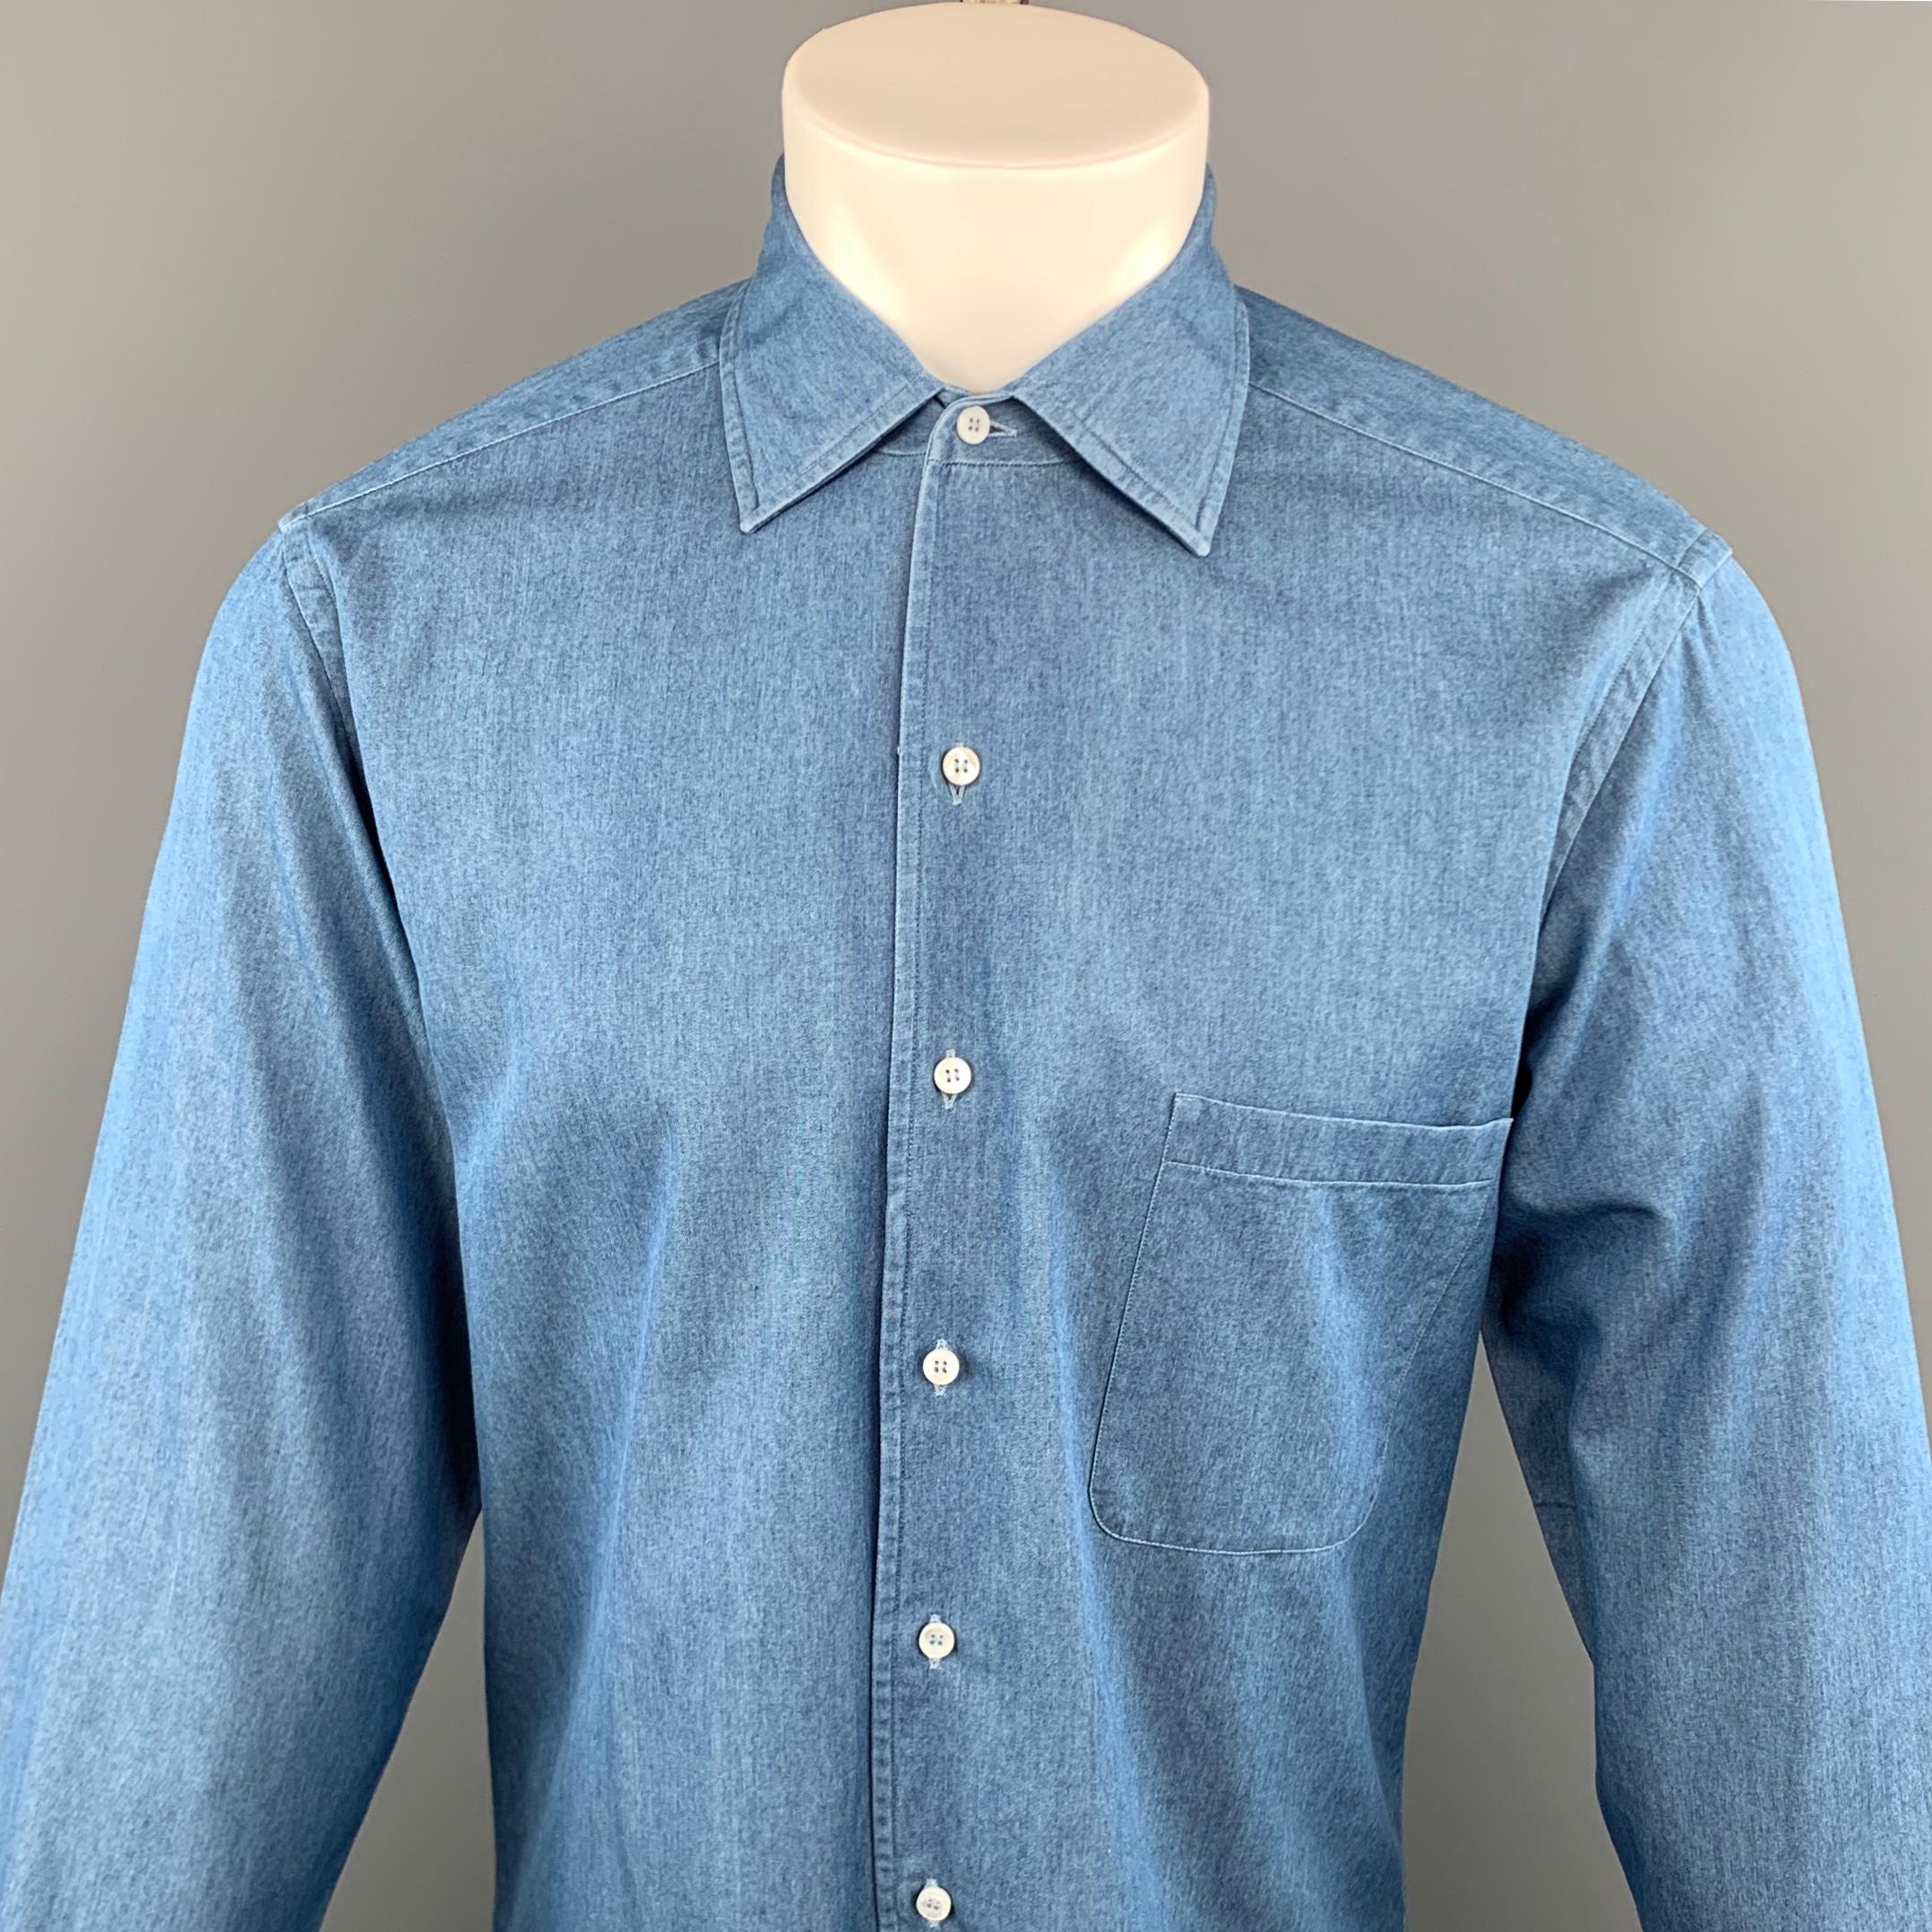 LORO PIANA long sleeve shirt comes in a indigo cotton featuring a button up style, spread collar, and a front patch pocket. Made in Italy.
 
Excellent Pre-Owned Condition.
Marked: M
 
Measurements:
 
Shoulder: 17 in.
Chest: 43 in.
Sleeve: 26.5